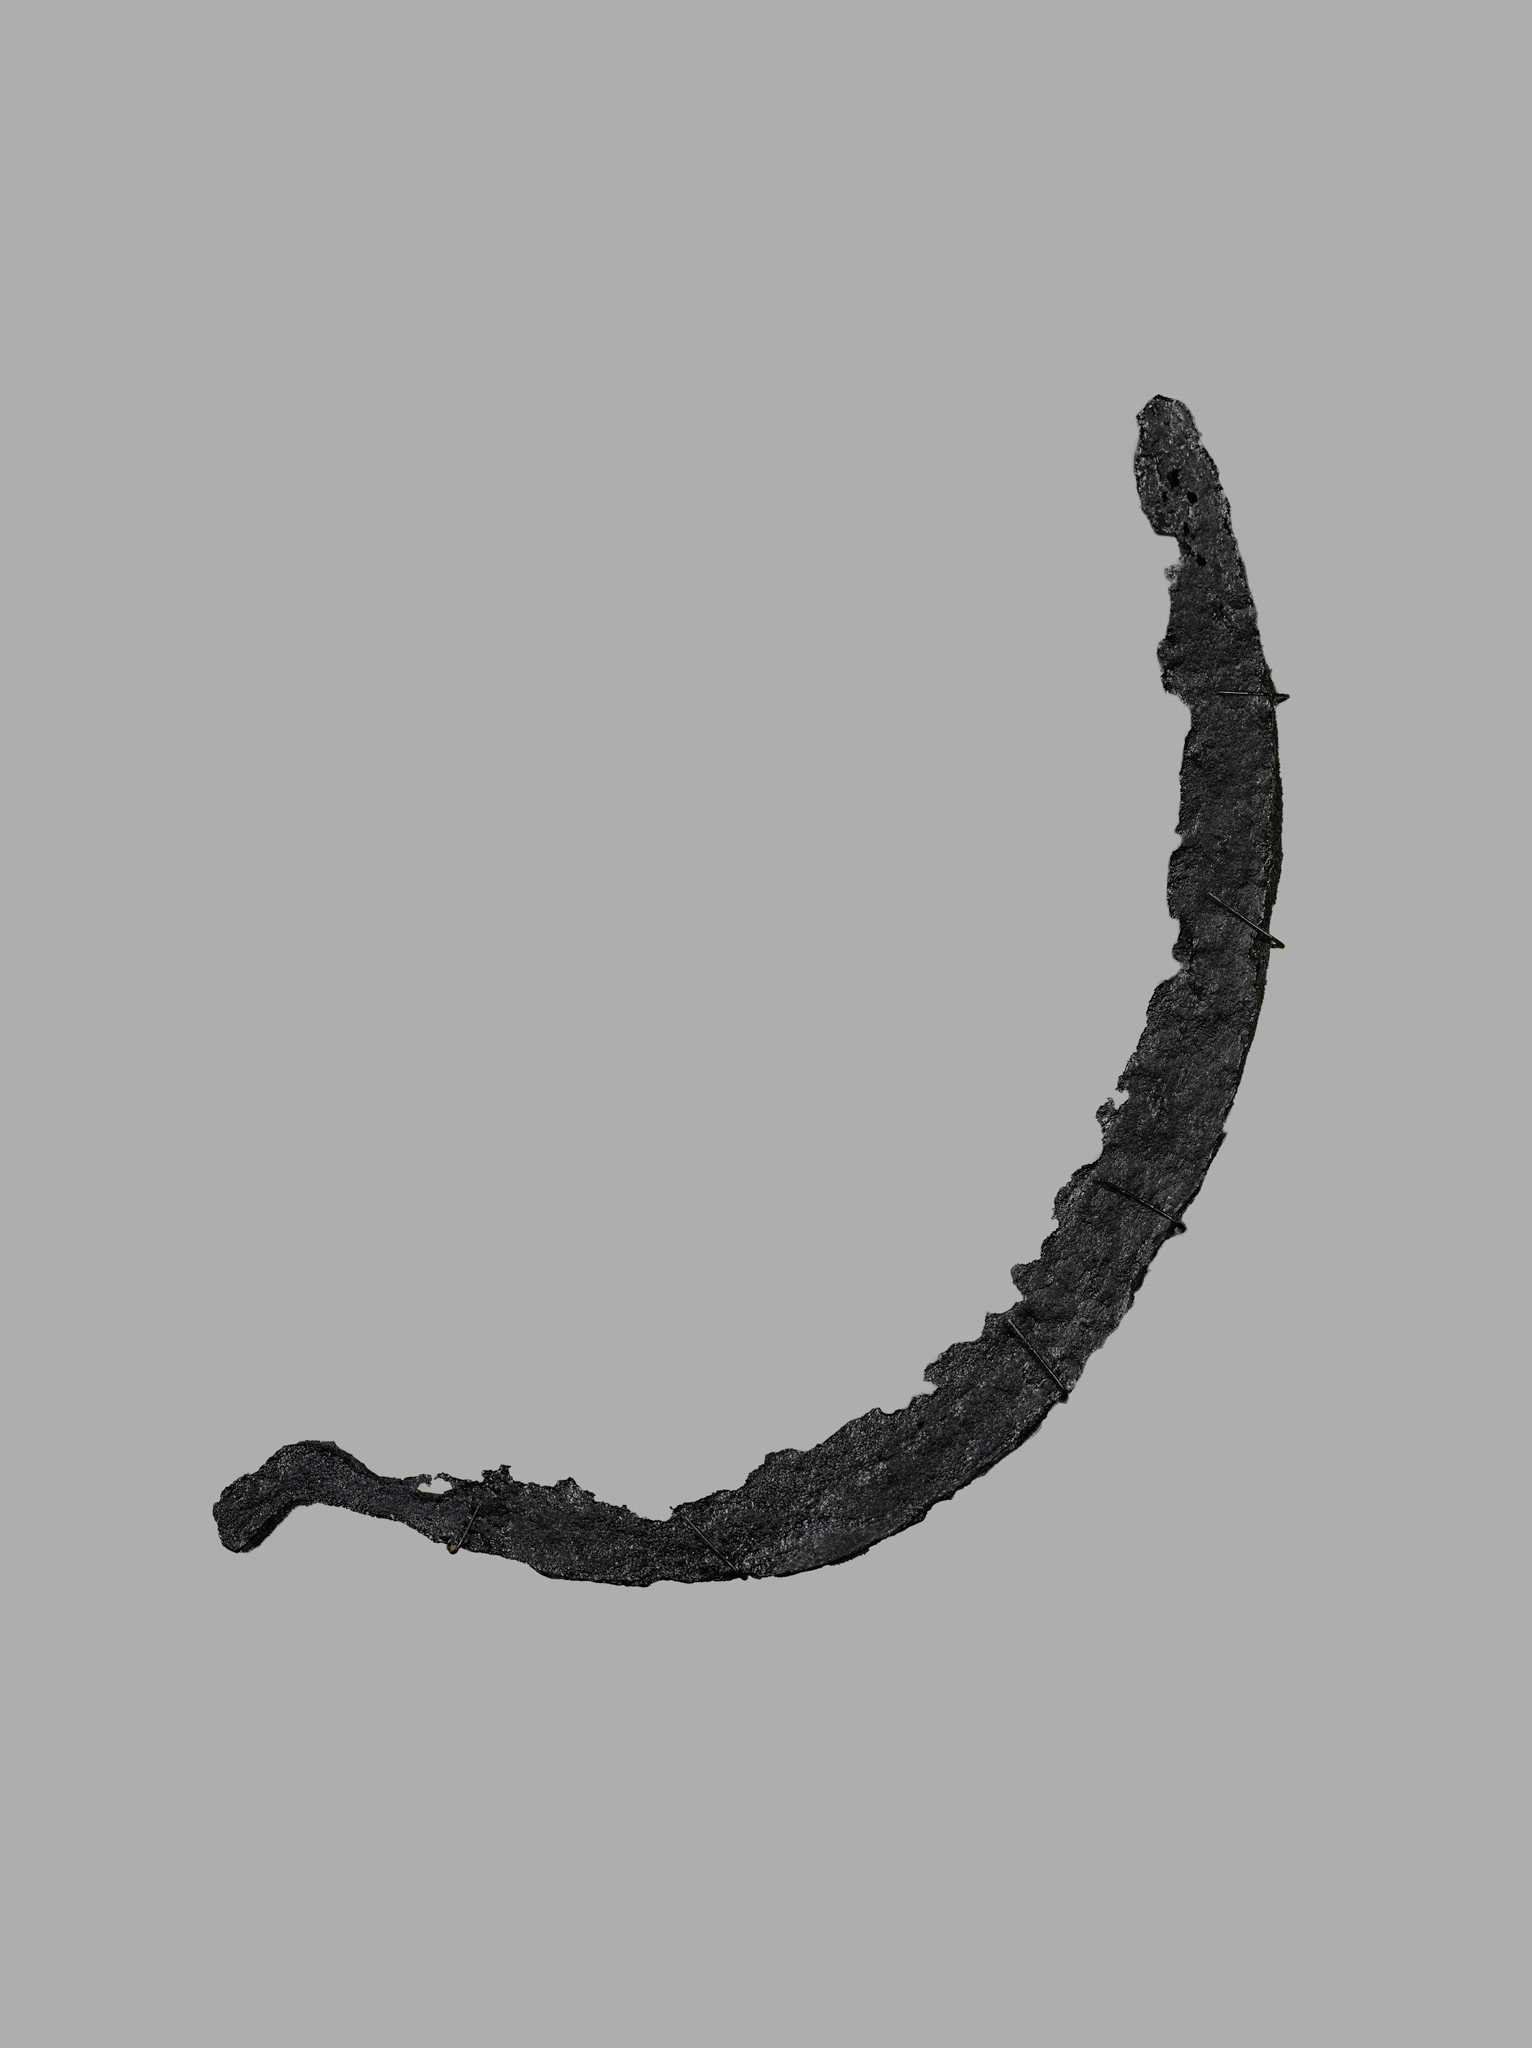 Photograph of a rice sickle from Drayton Hall